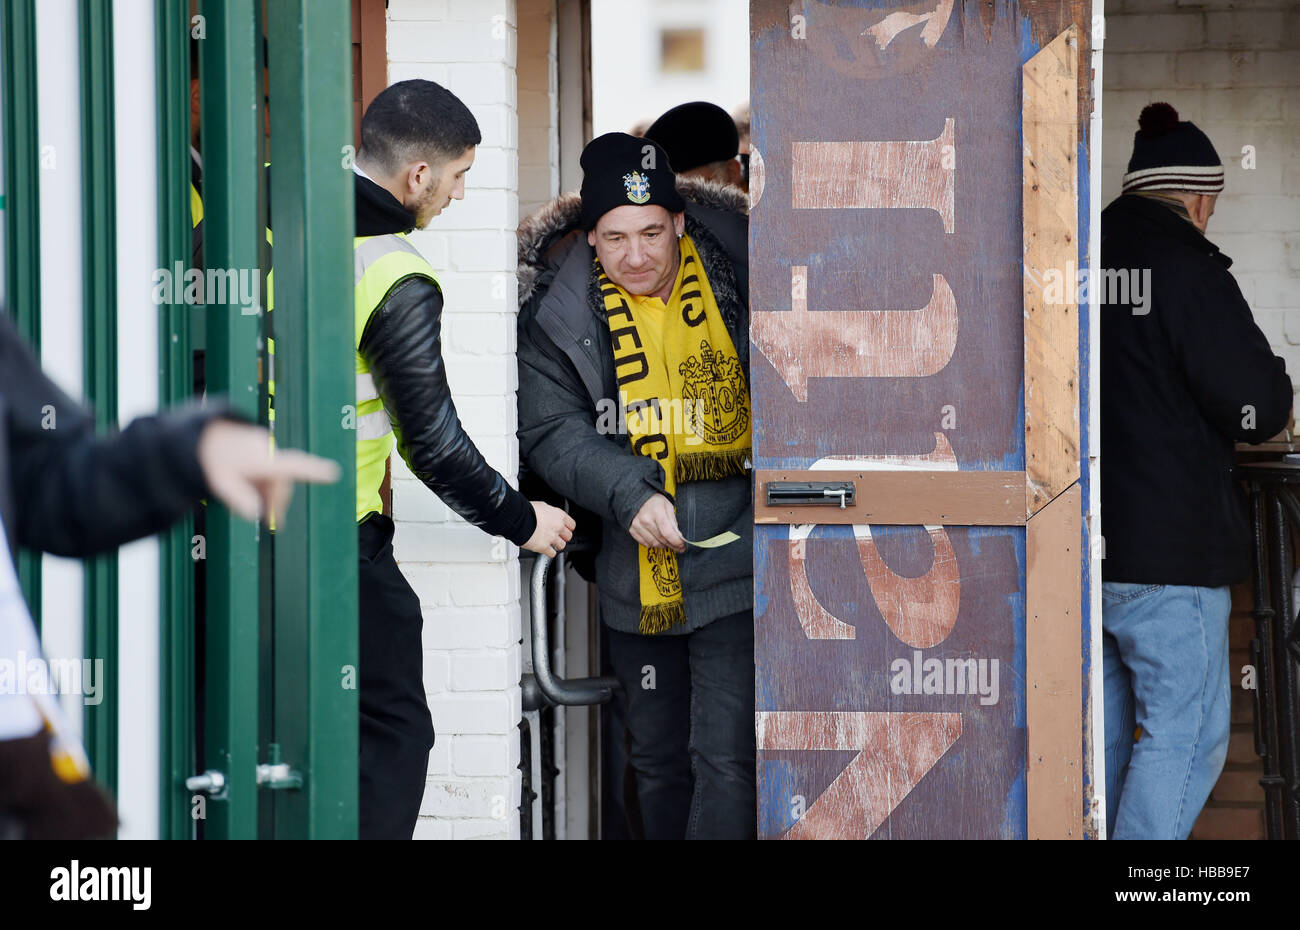 Fans come through the turnstiles for a Sutton United Football Club match Stock Photo